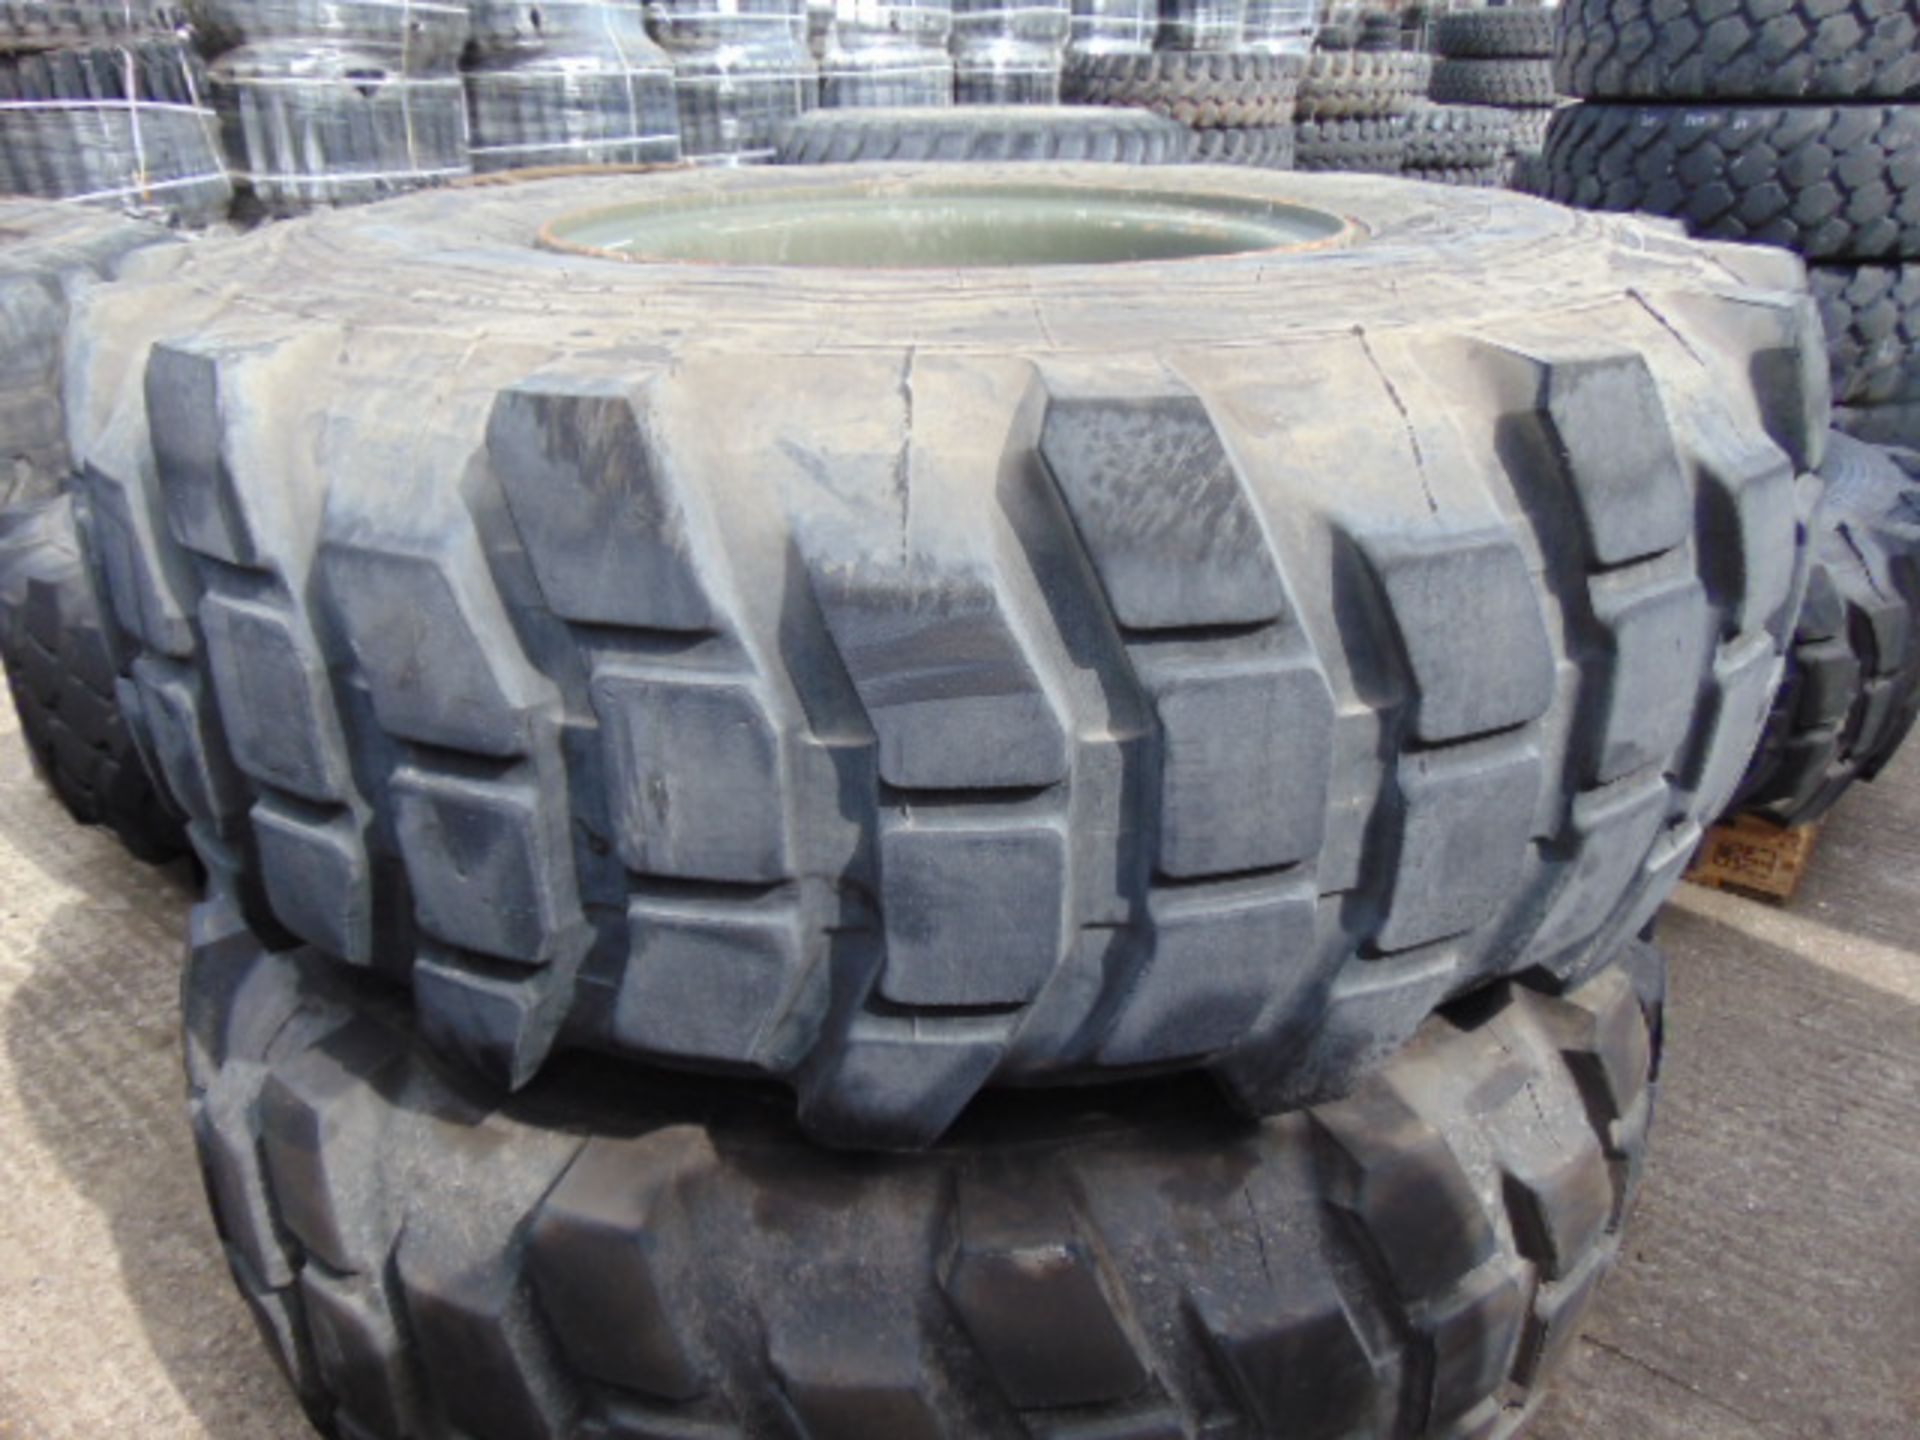 2 x Michelin 20.5 R25 XL Tyres on 10 stud Rims - Image 2 of 6